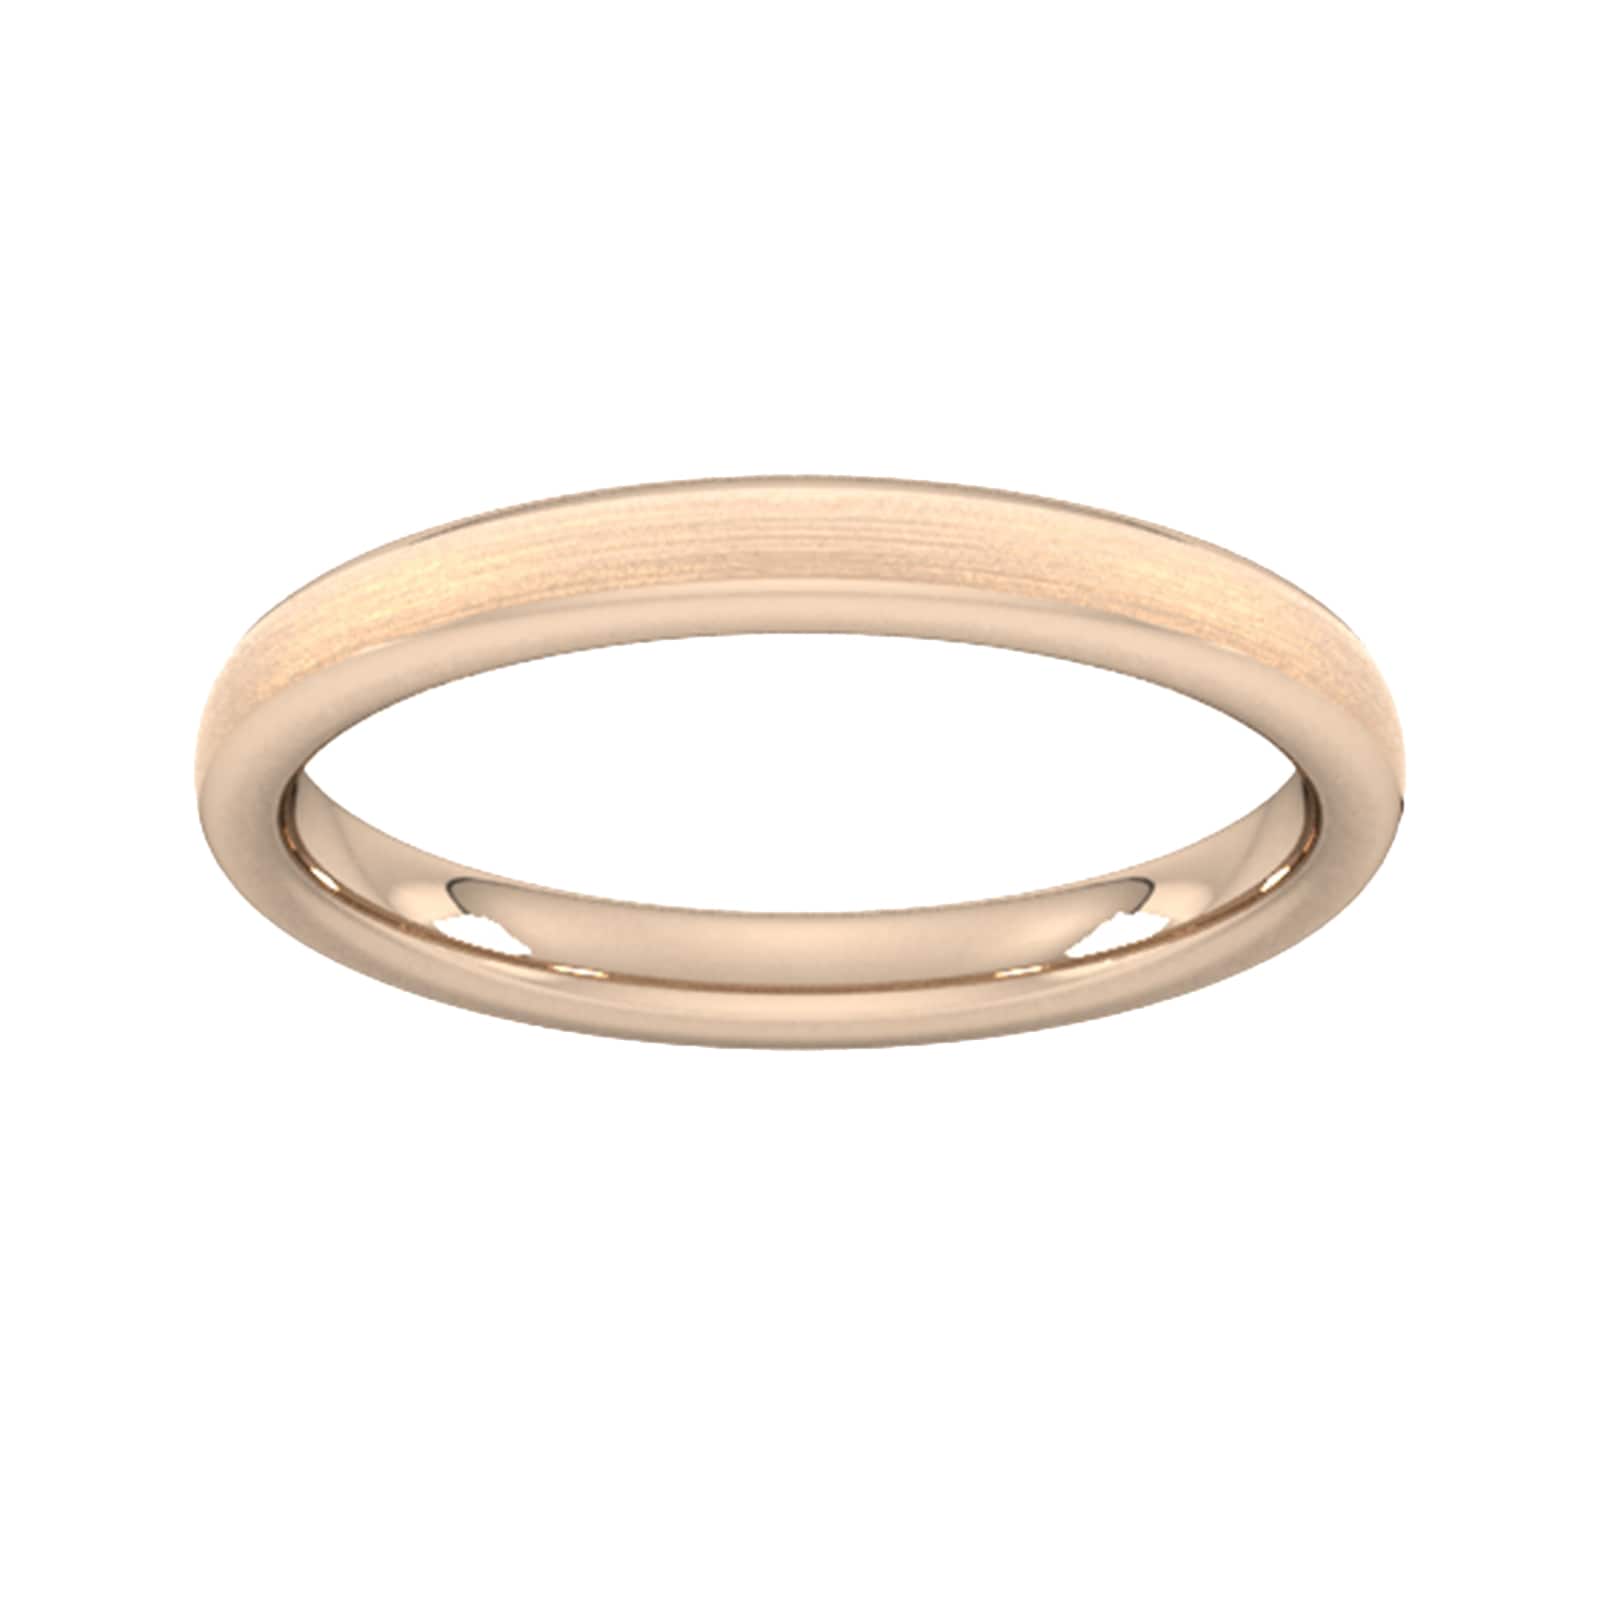 2.5mm Flat Court Heavy Matt Finished Wedding Ring In 9 Carat Rose Gold - Ring Size S